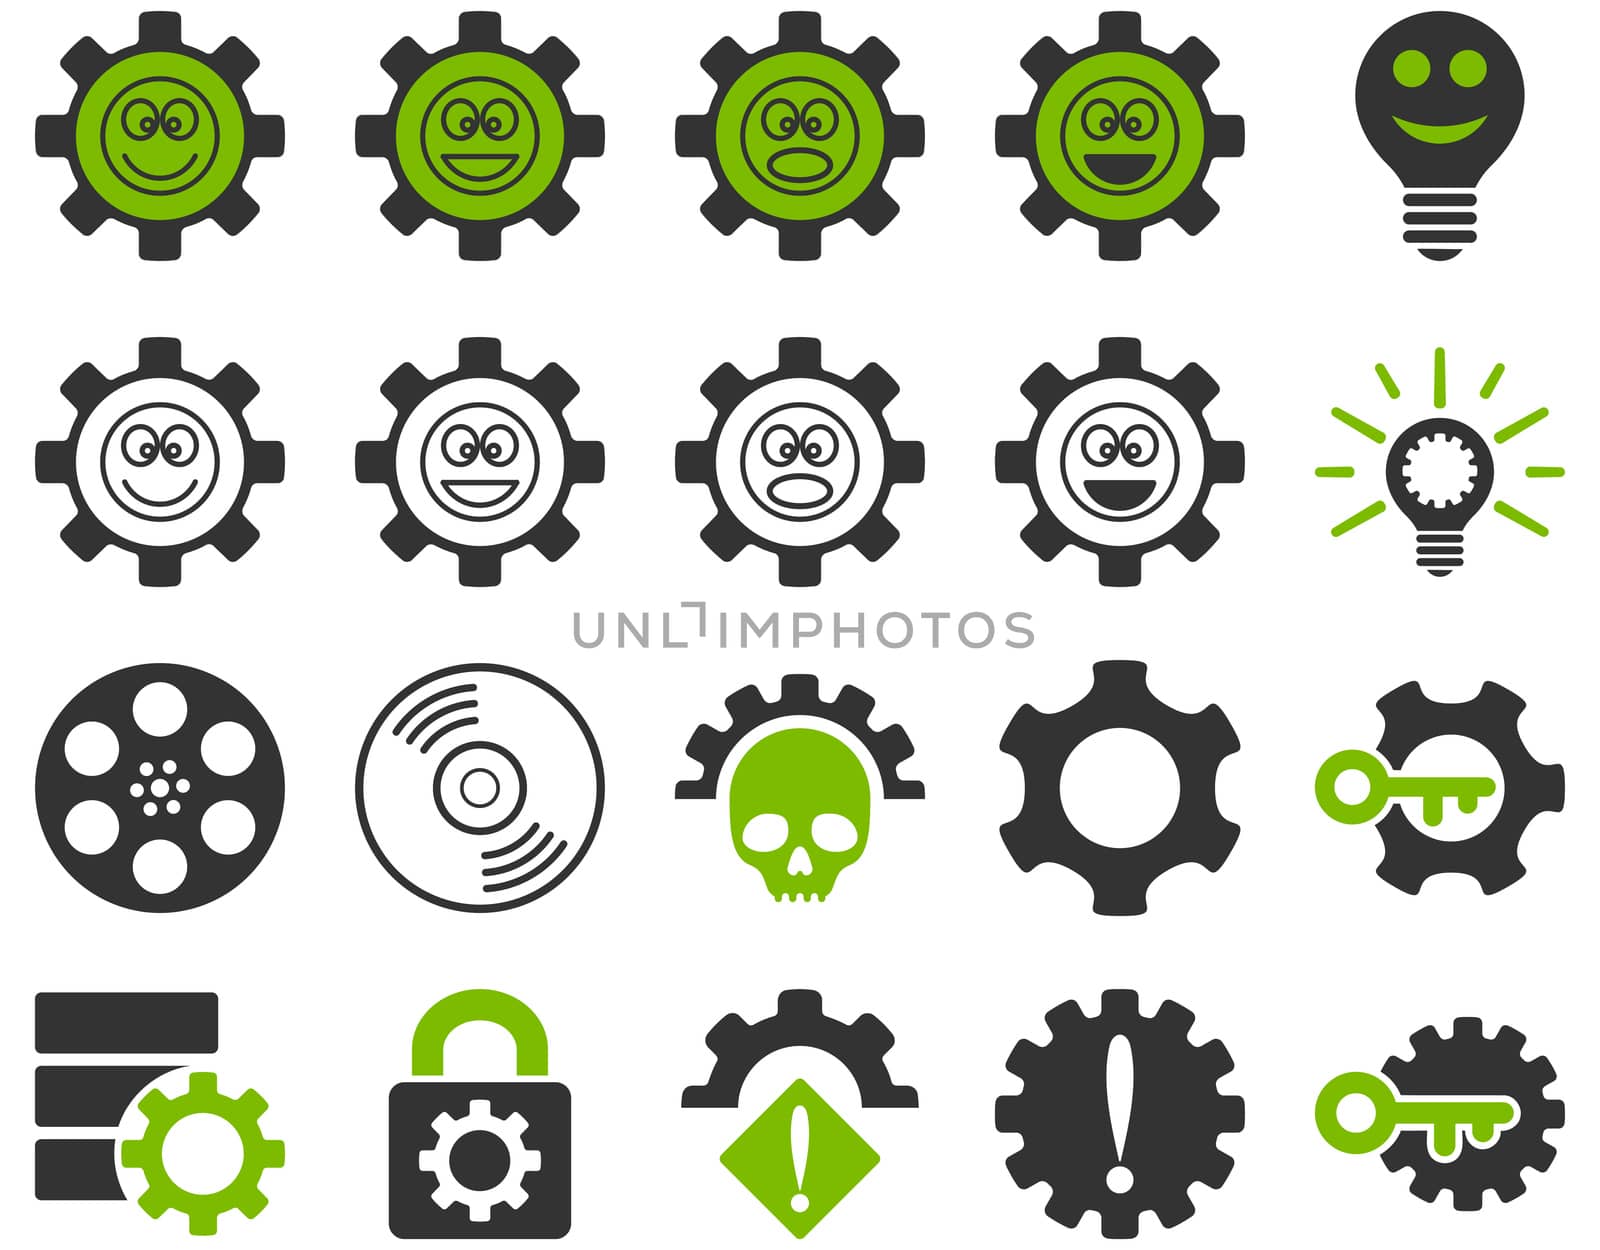 Tools and Smile Gears Icons. Icon set style is bicolor flat images, eco green and gray colors, isolated on a white background.